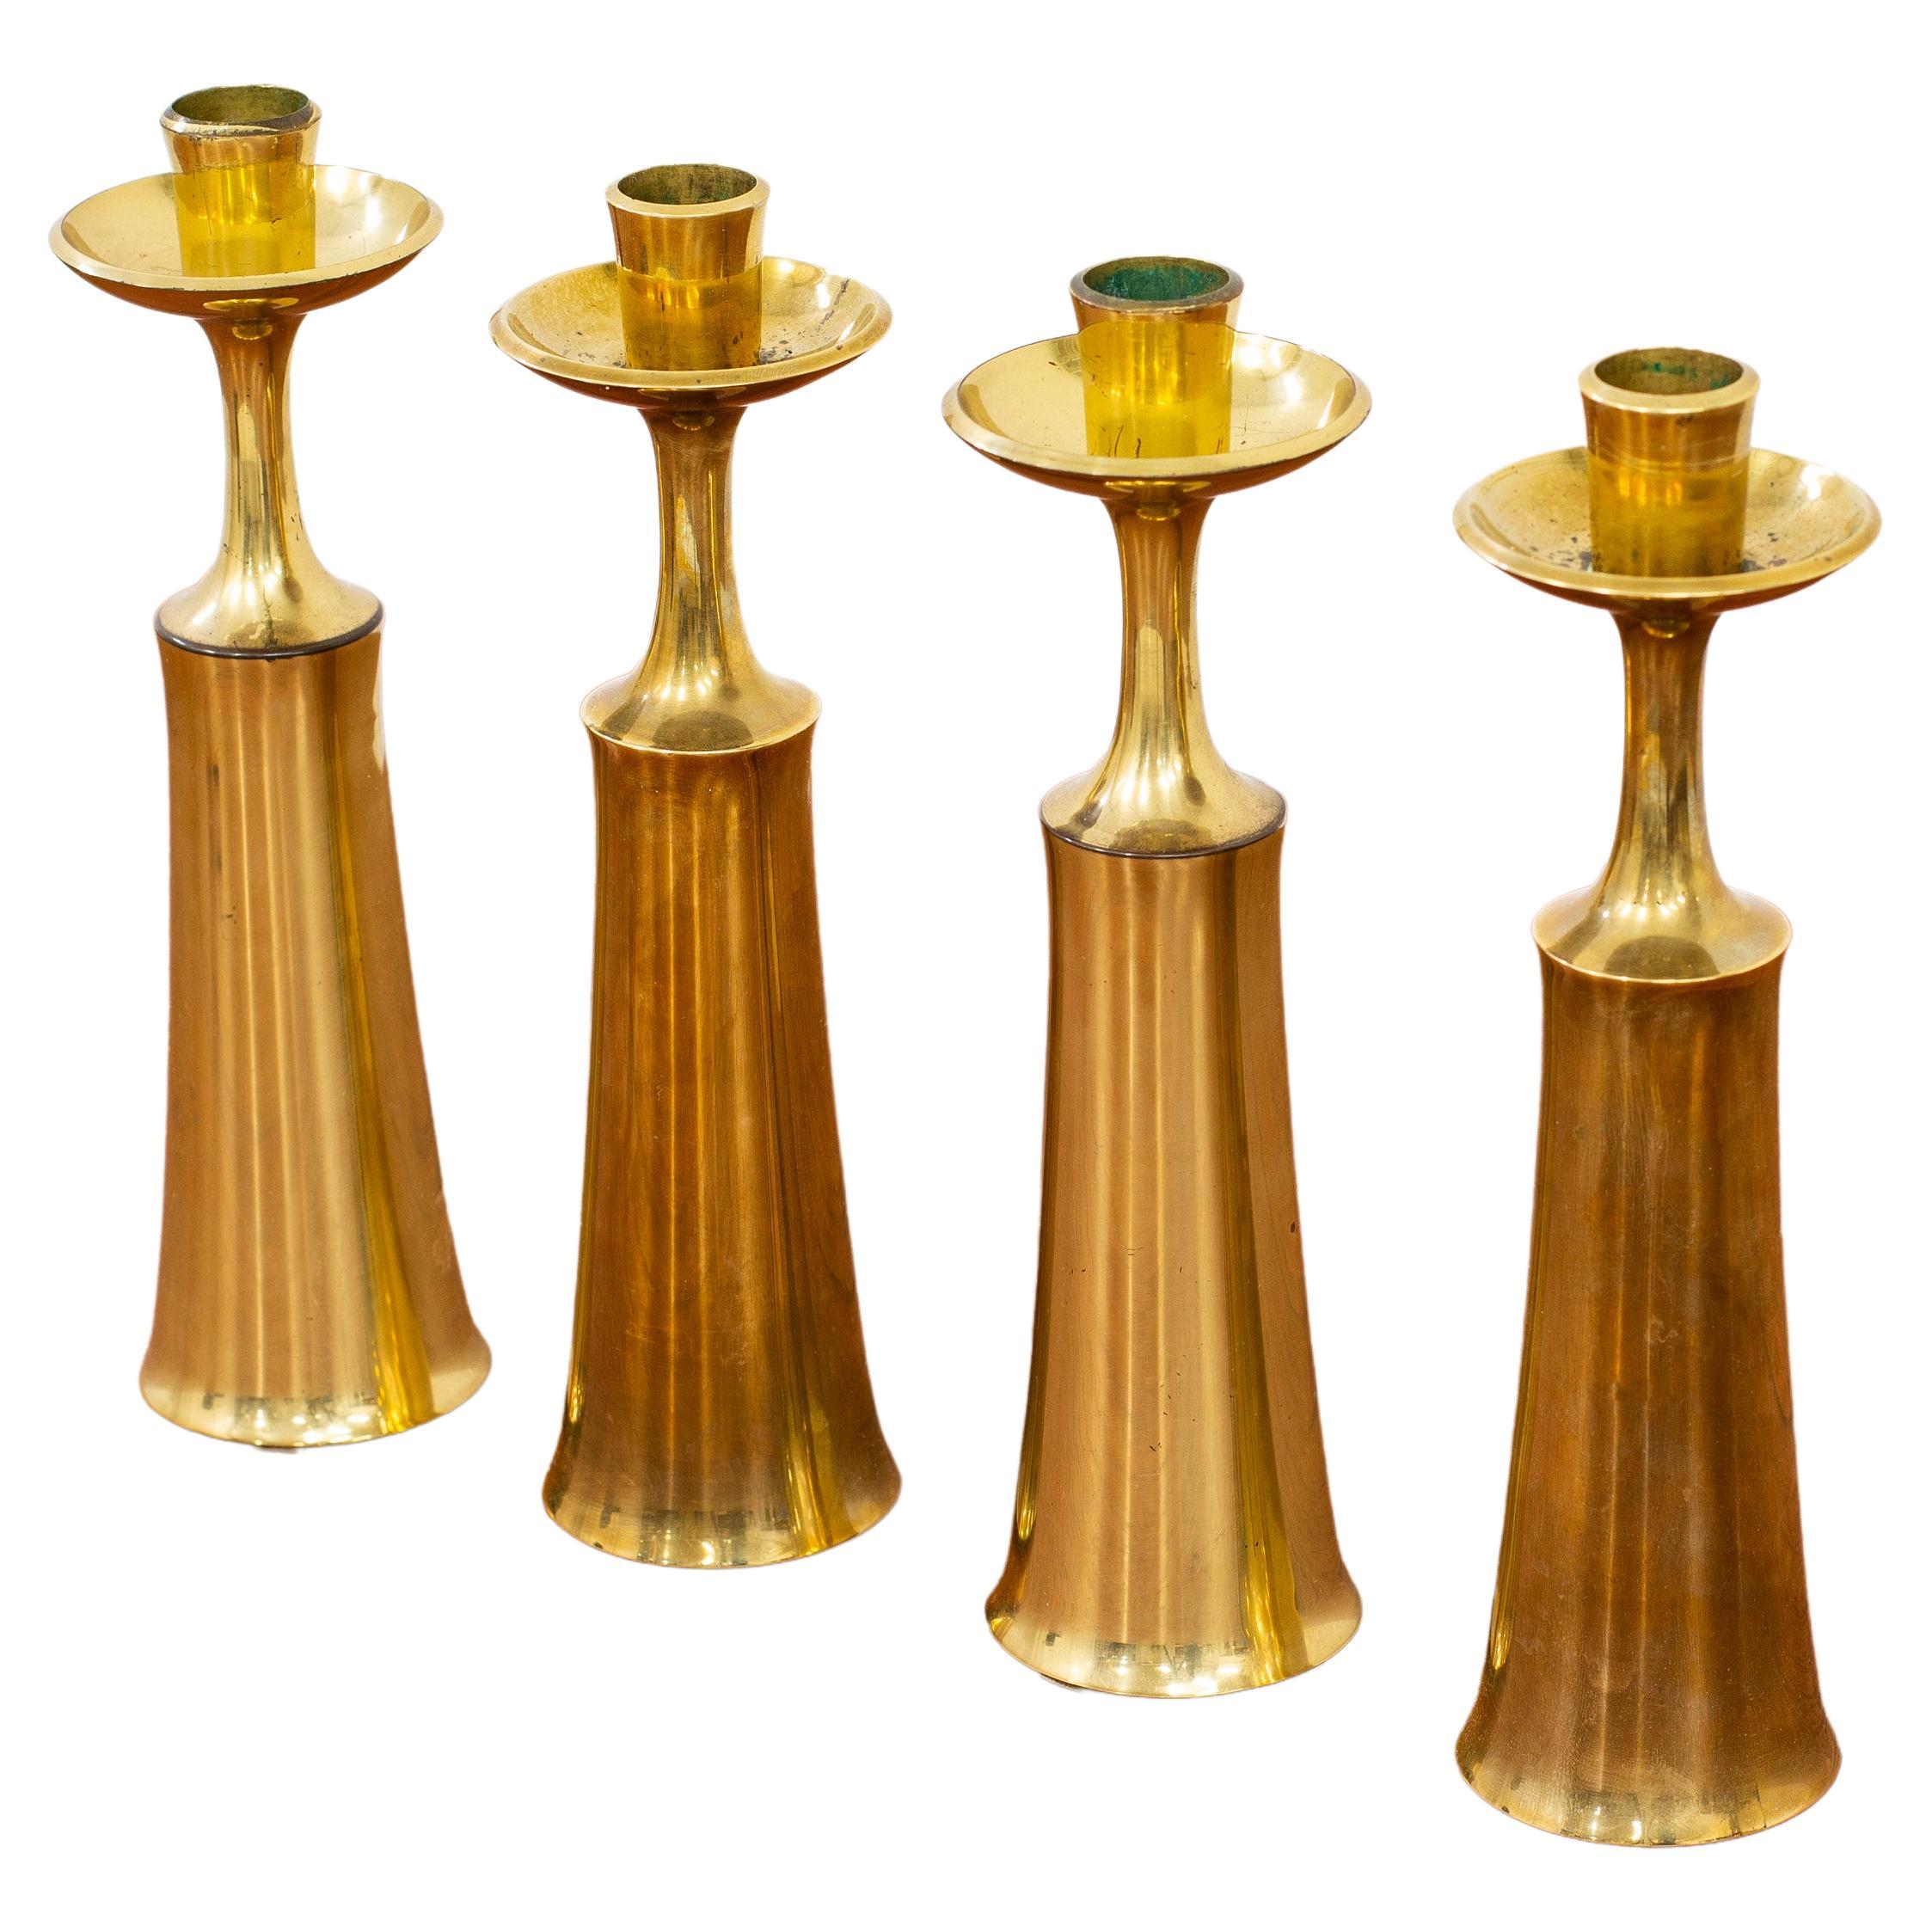 Candle Sticks in Brass by Jens Harald Quistgaard for Dansk Designs, 1950s